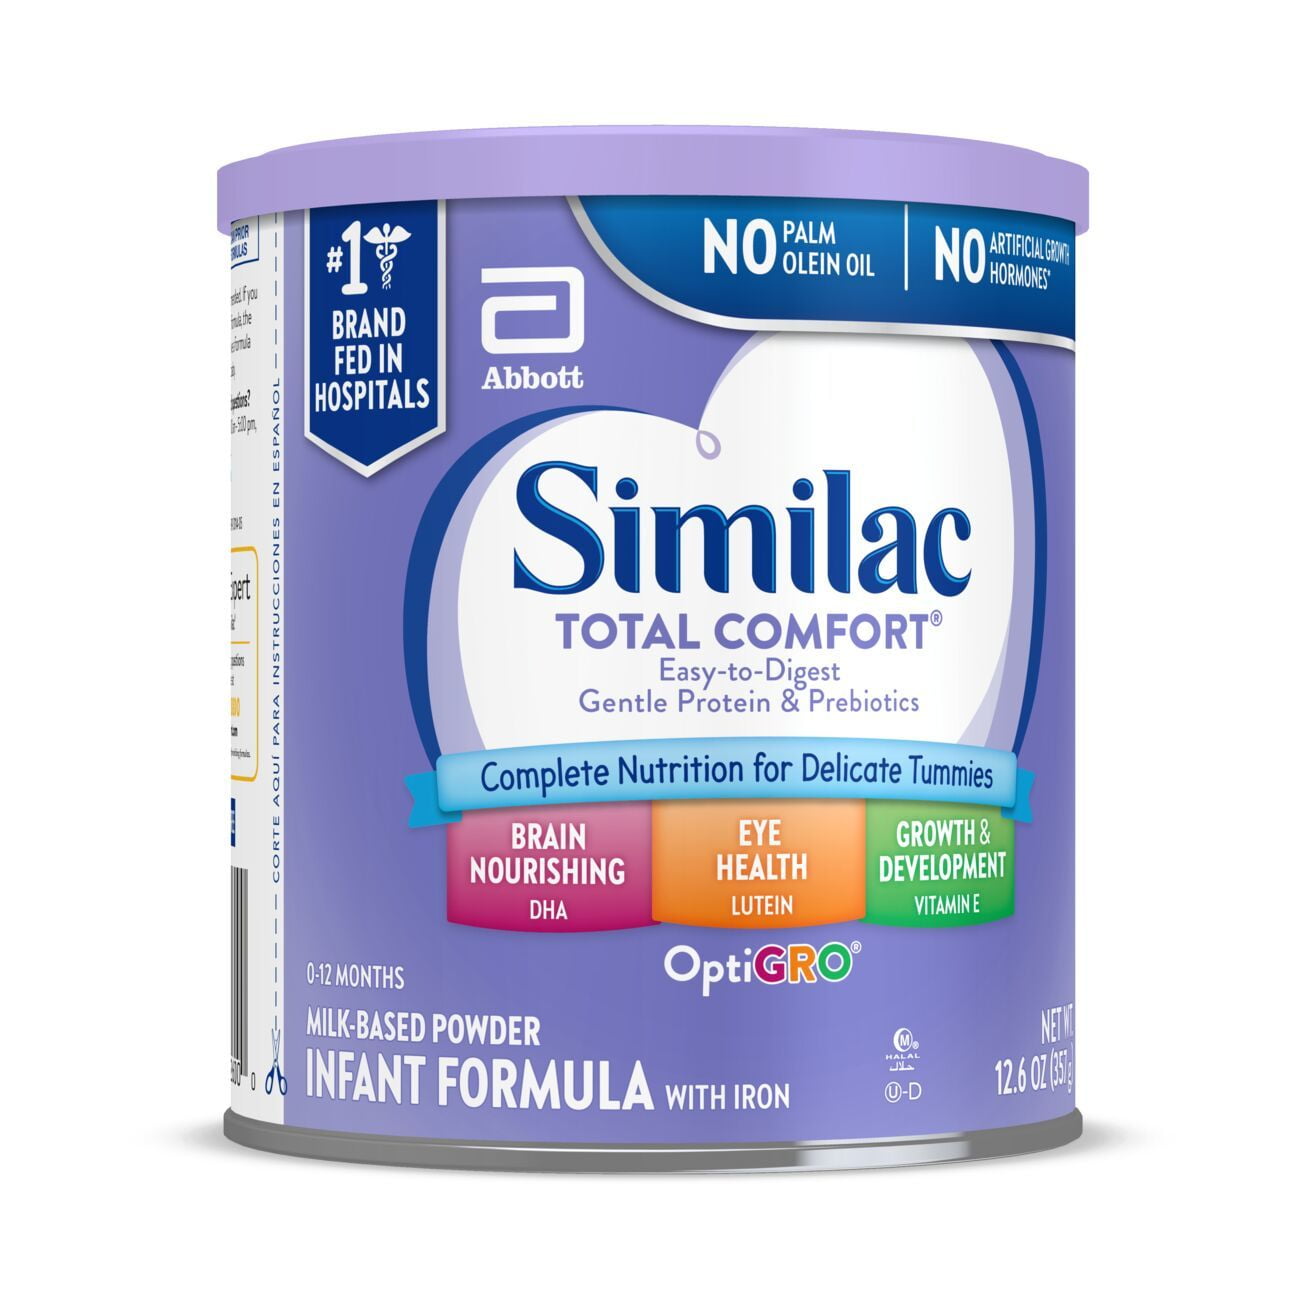 Wholesale prices with free shipping all over United States Similac Total Comfort Powder Baby Formula, 12.6 oz Canister - Steven Deals